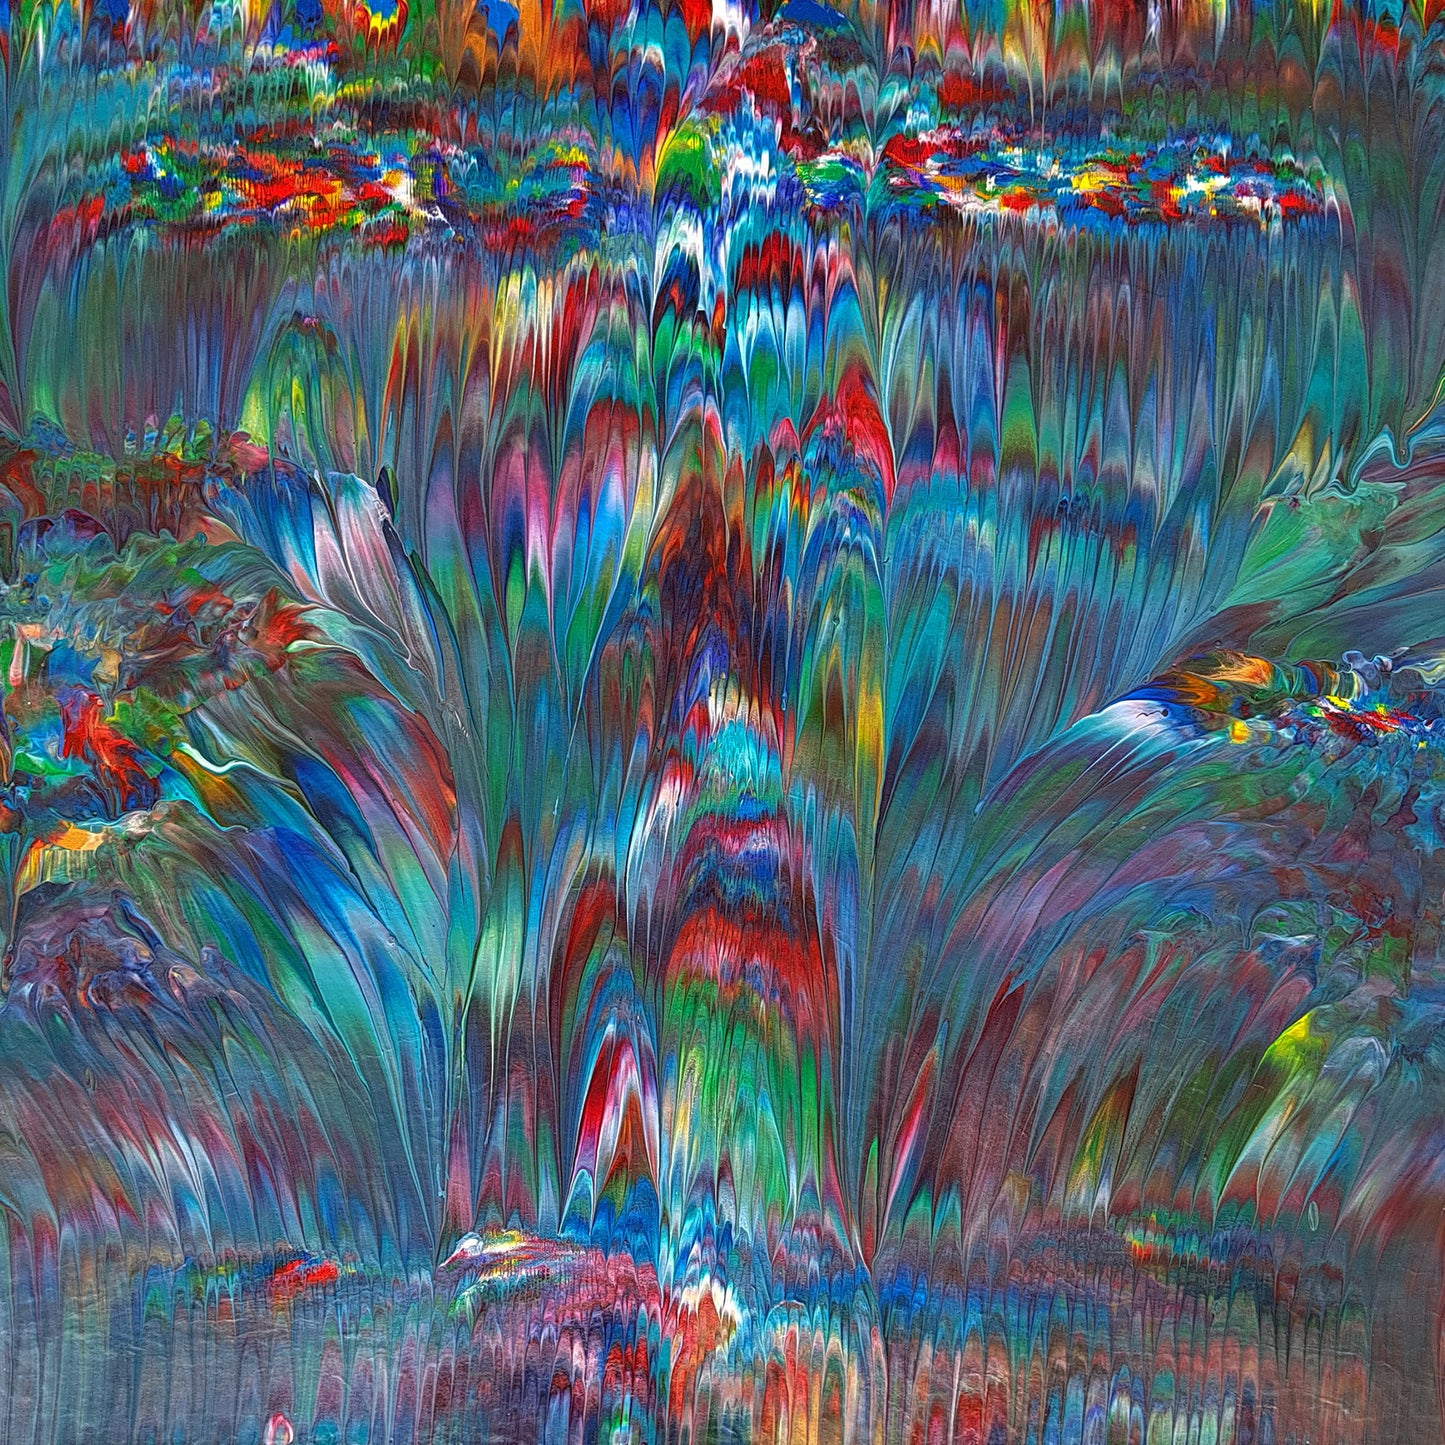 Hypnotic-Sea-by-Alexandra-Romano-Art-Gallery-Toronto-Buy-Contemporary-Artworks-Canadian-Artists-Buy-Large-Abstract-Paintings-Modern